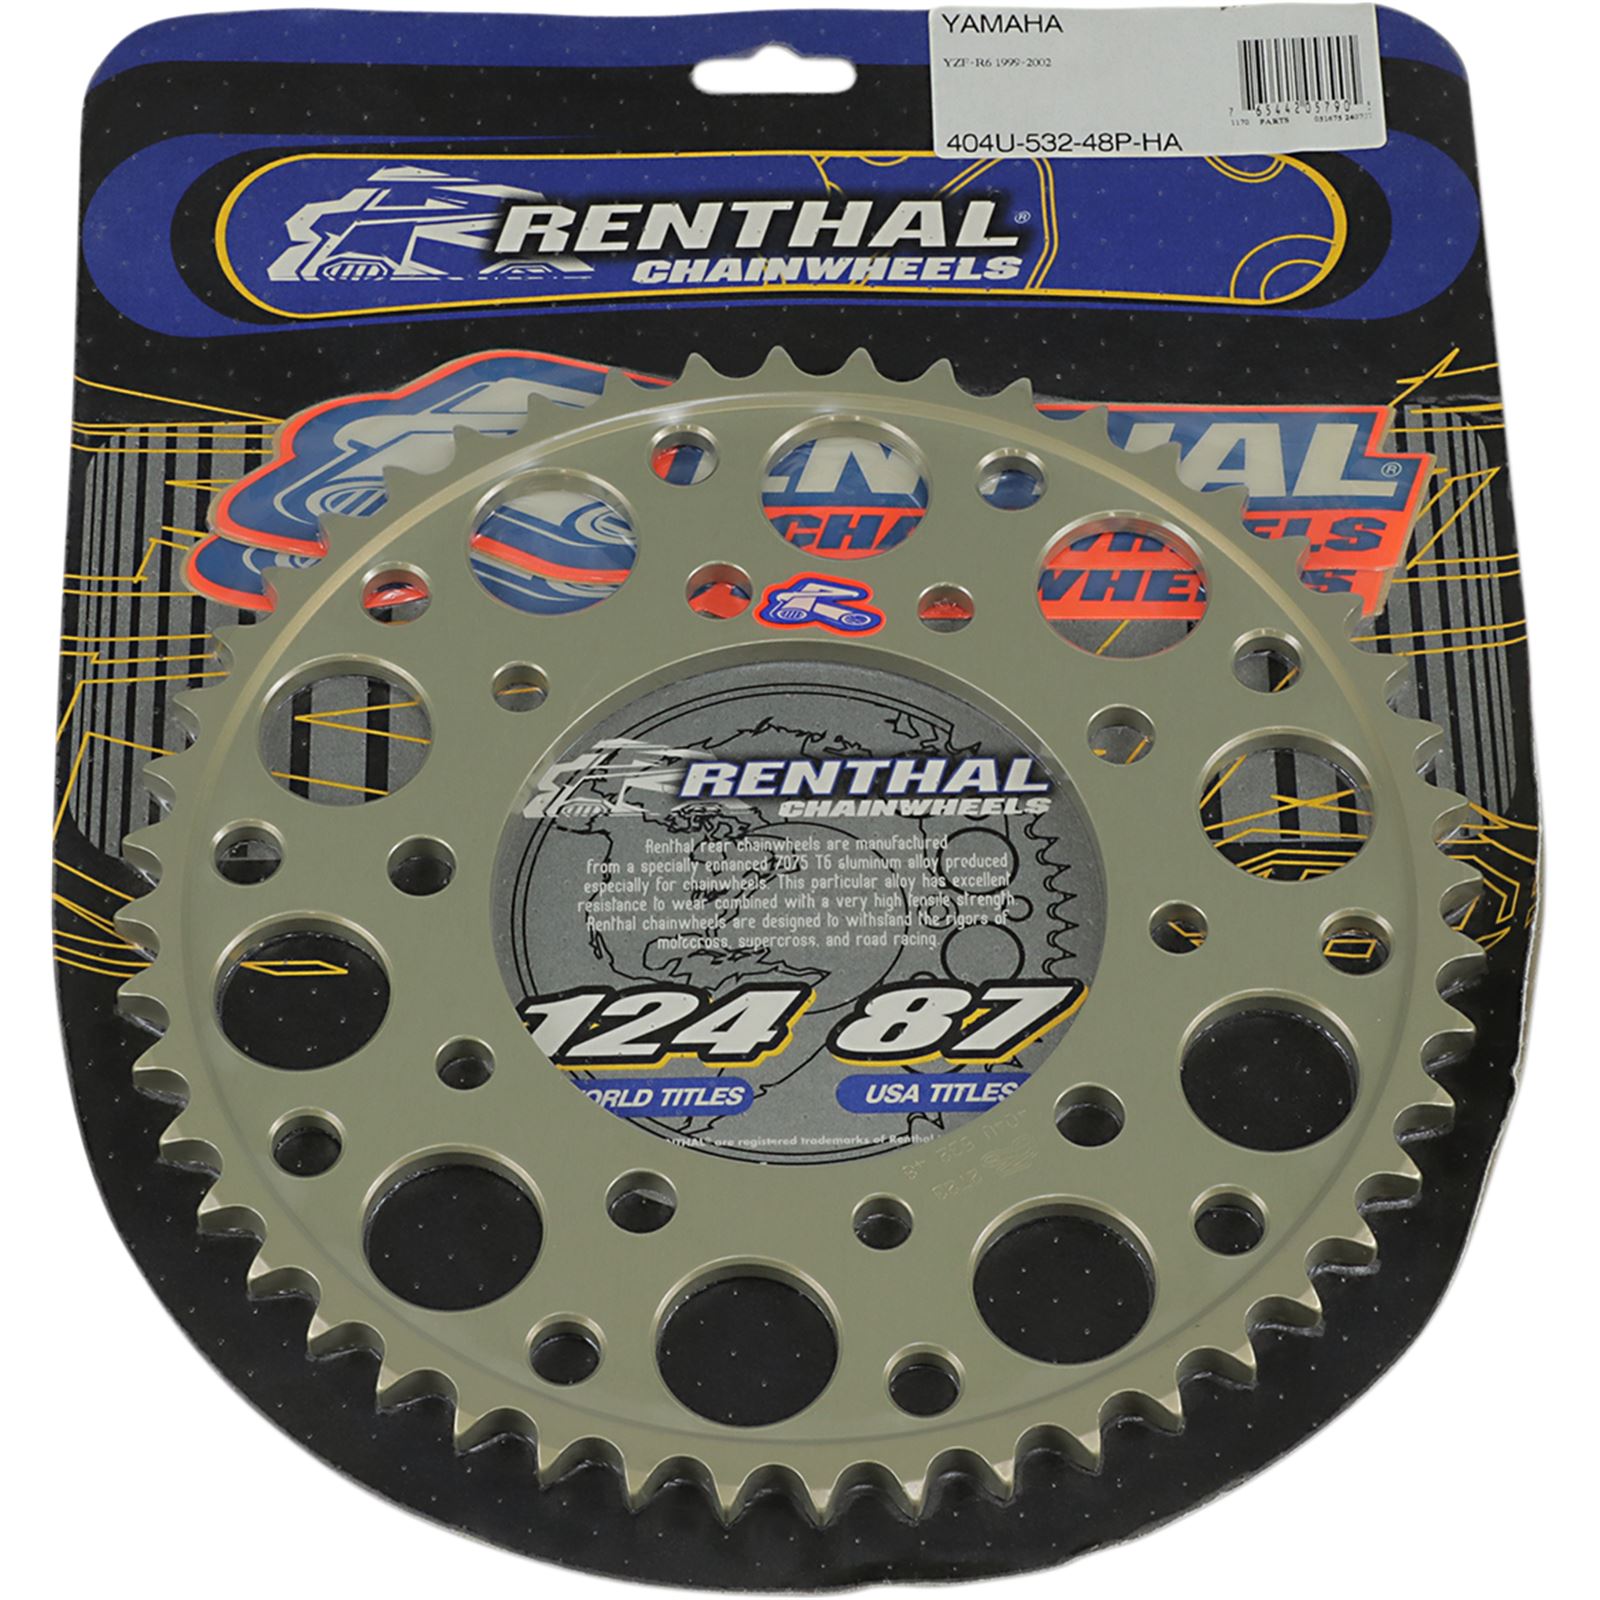 Renthal Sprocket for Yamaha - 48-Tooth